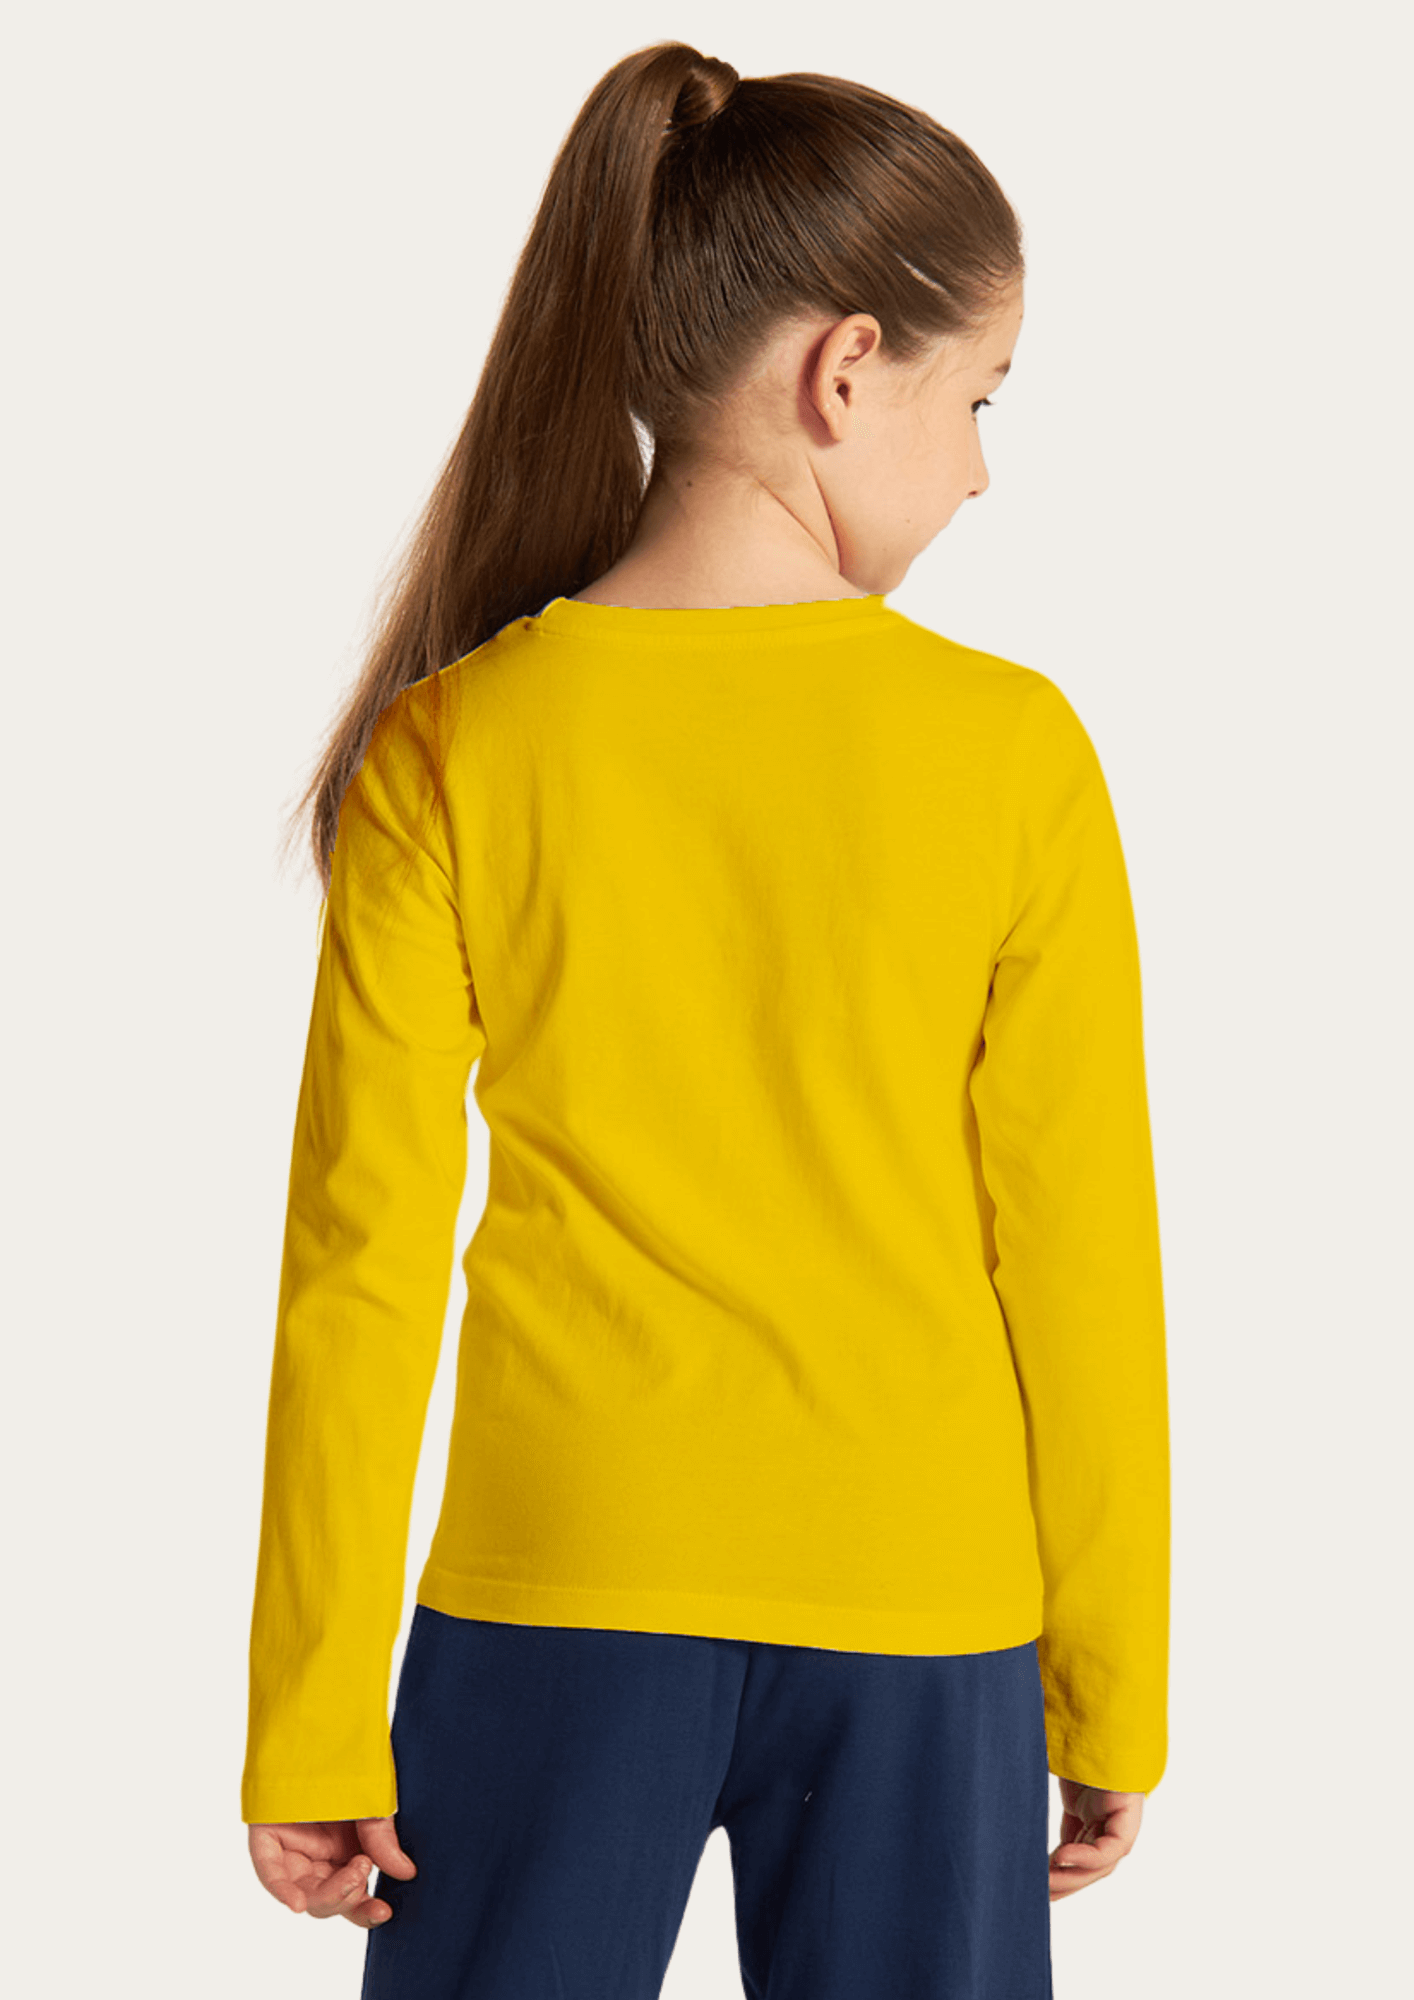 Yellow Full Sleeves Kids T-shirt By Offmint